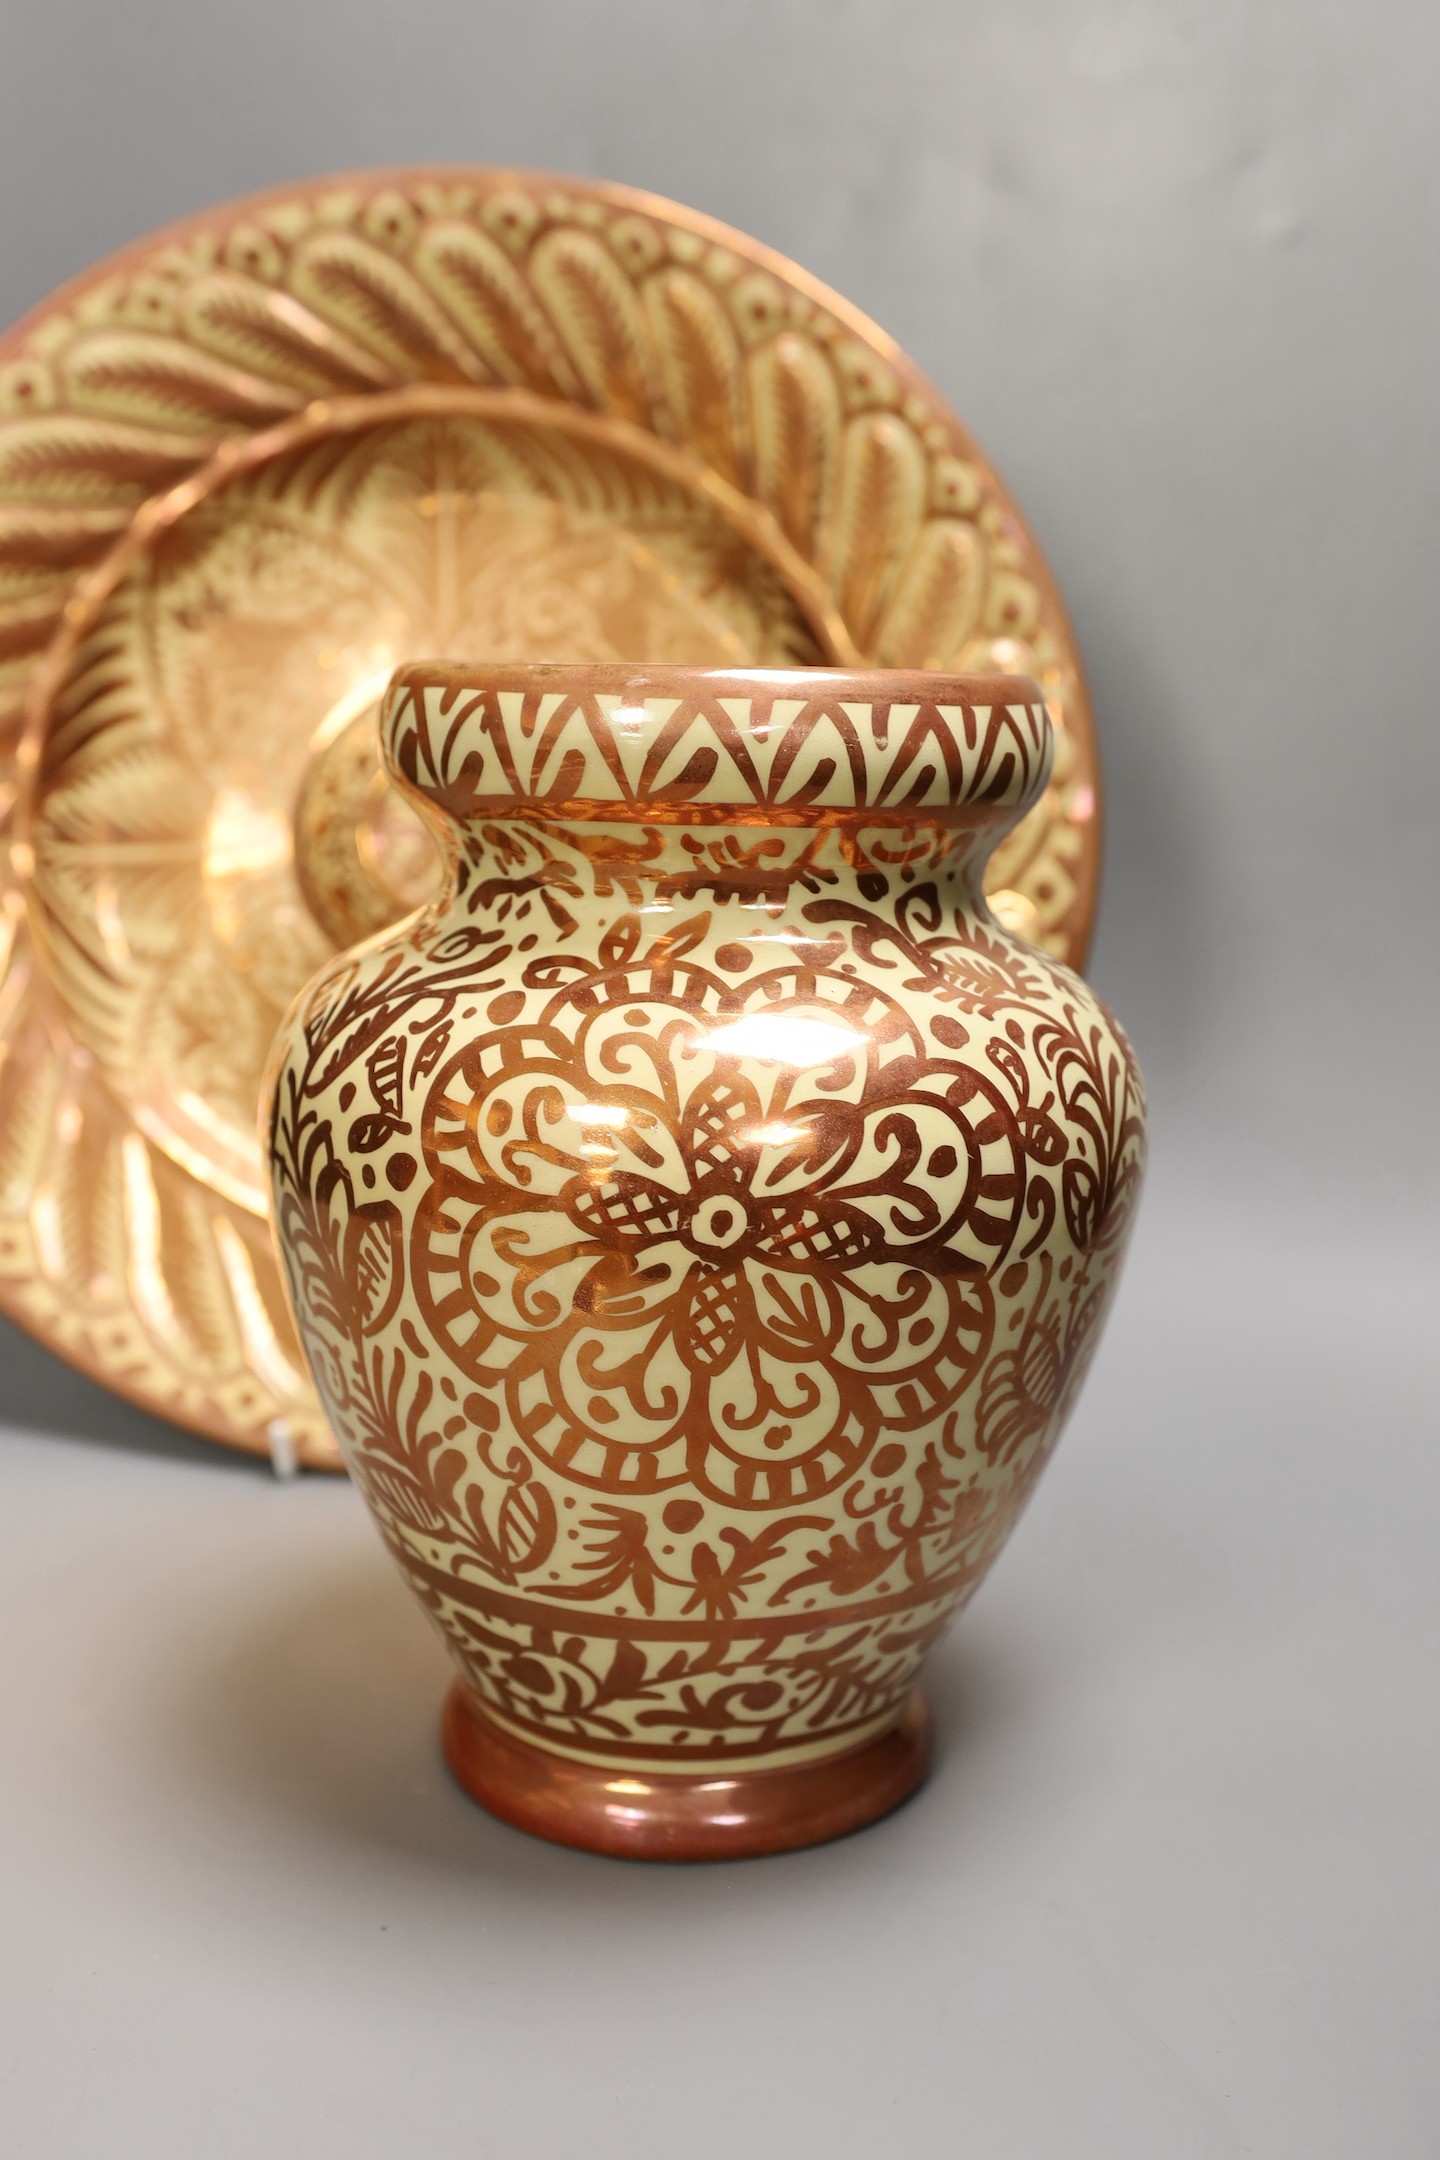 A Hispano Moresque style copper lustre pottery charger and vase, 24cm tall